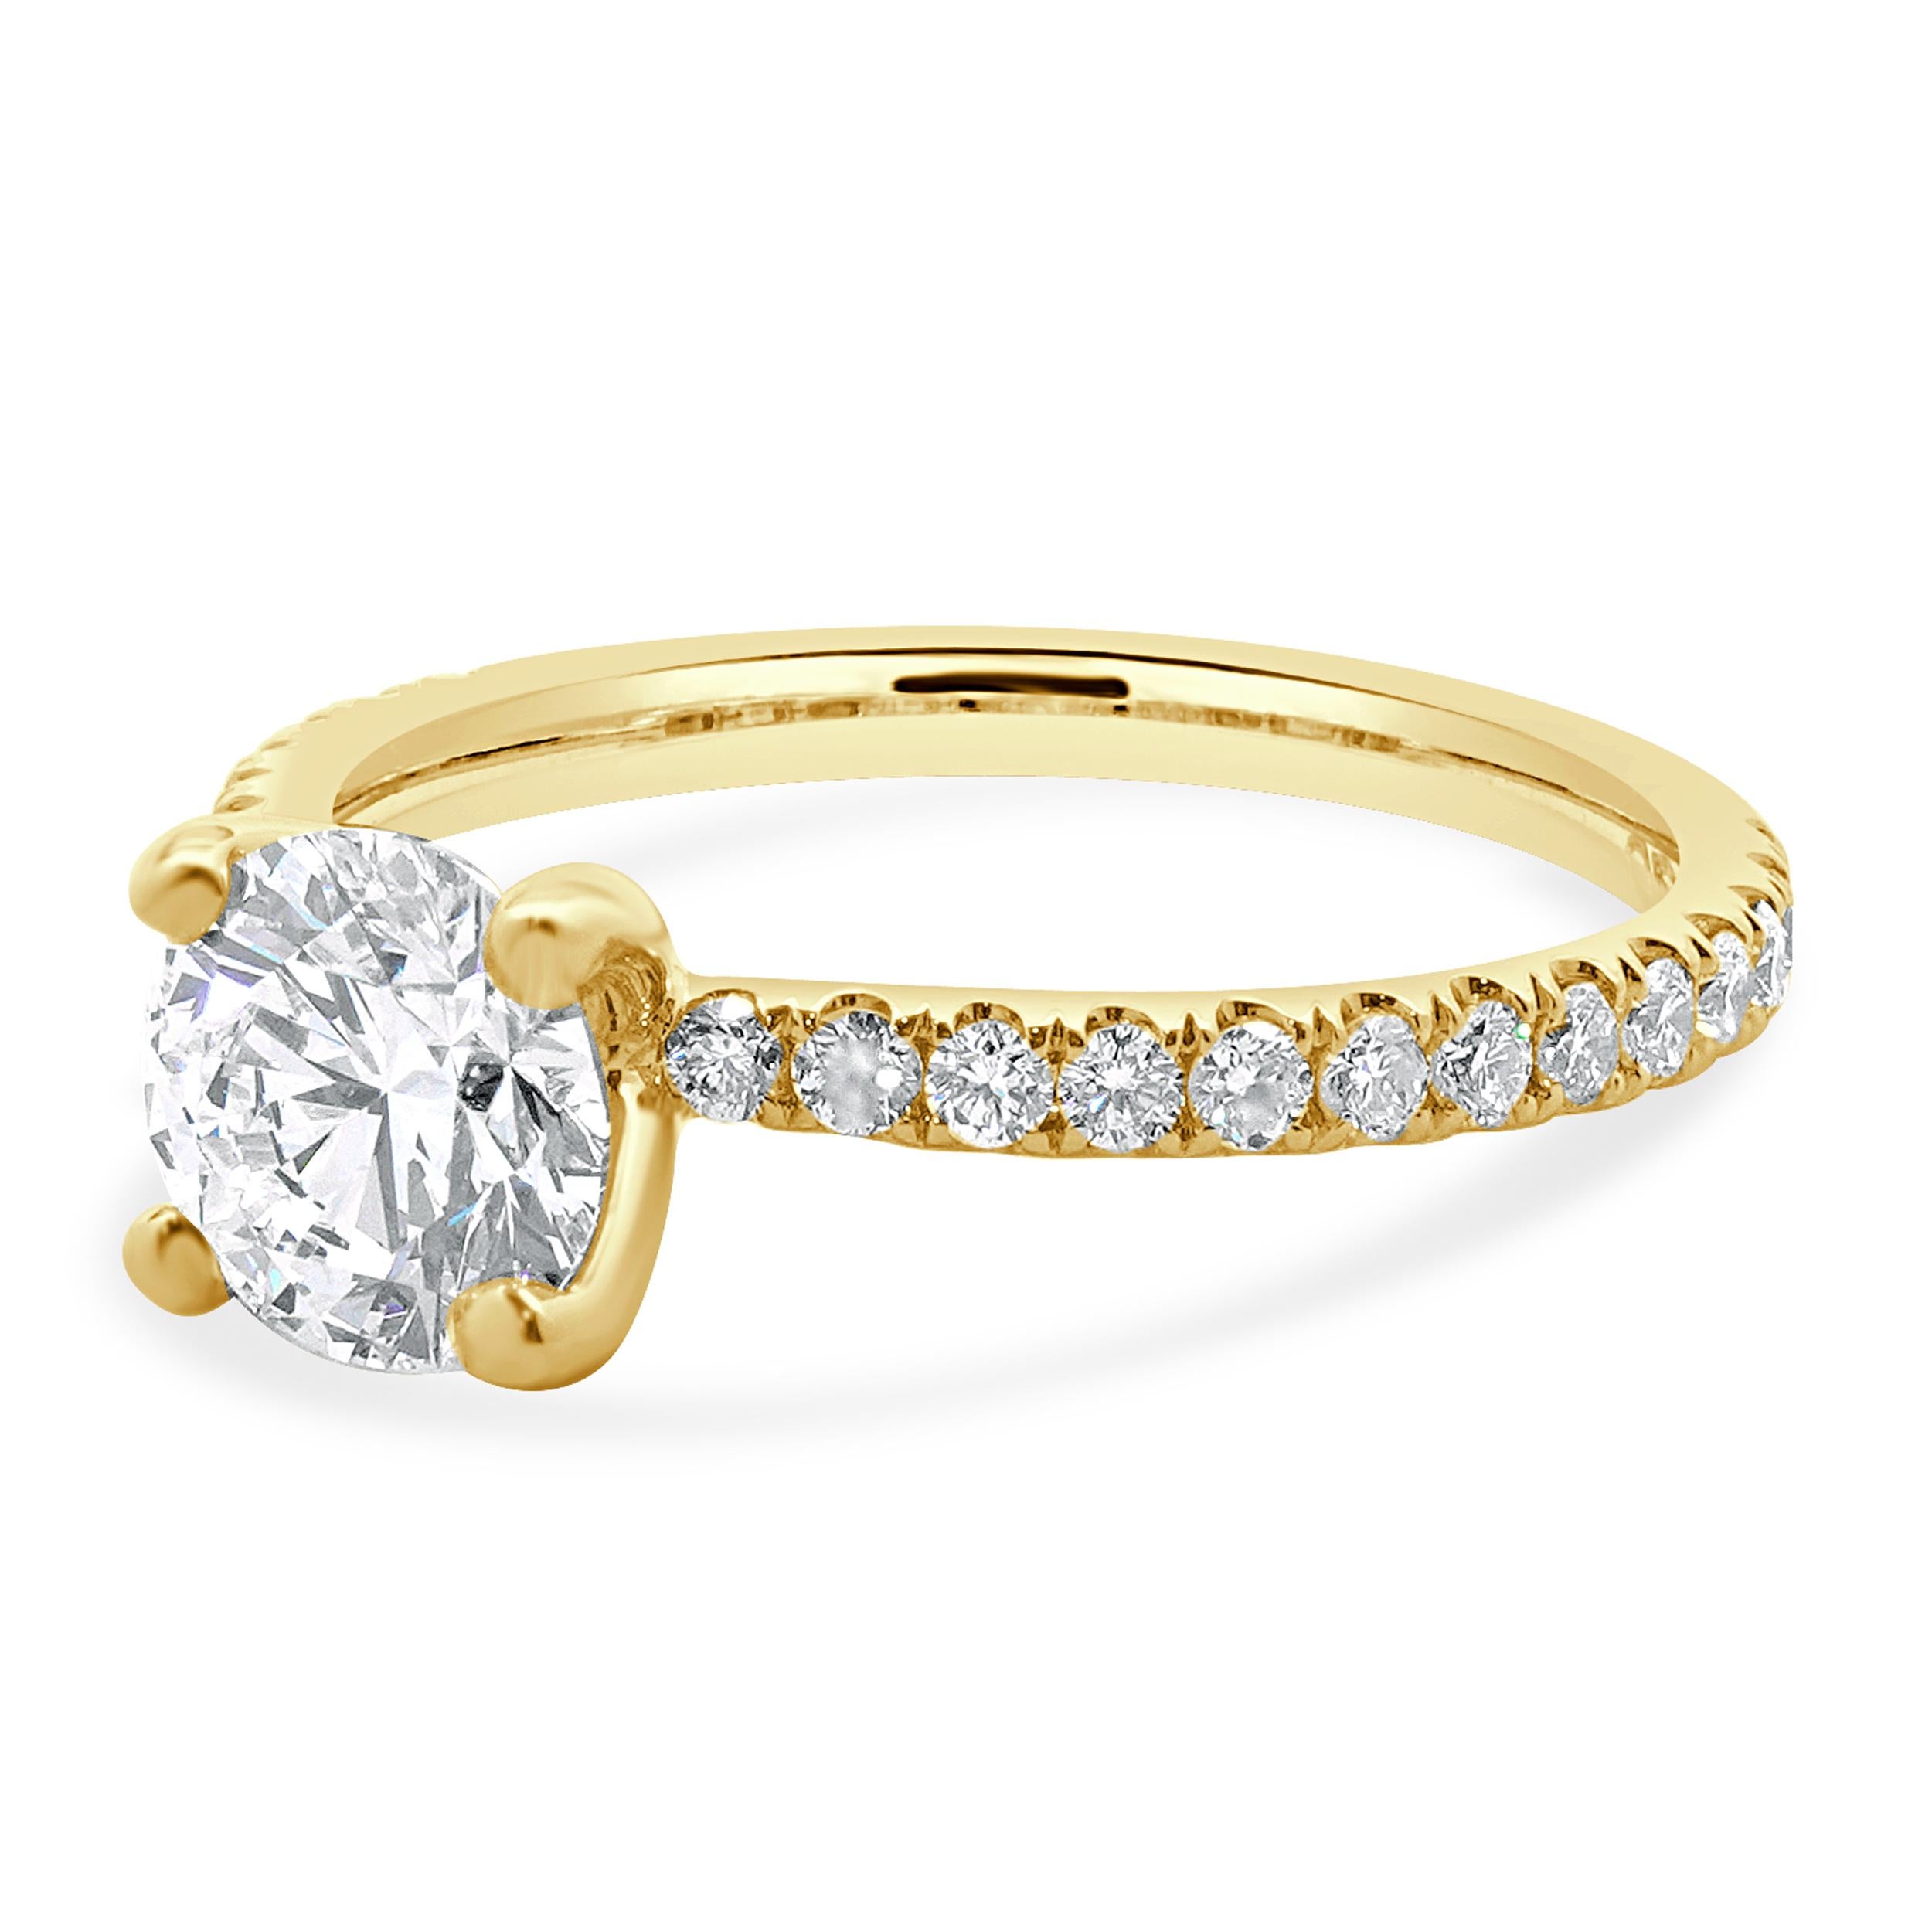 Designer: custom
Material: 14K yellow gold
Diamond: 1 round brilliant cut = 1.13ct
Color: E
Clarity: VVS1
Diamond: 26 round brilliant = 0.26cttw
Color: G
Clarity: SI1
Ring Size: 6.5 (complimentary sizing available)
Weight: 2.62 grams
